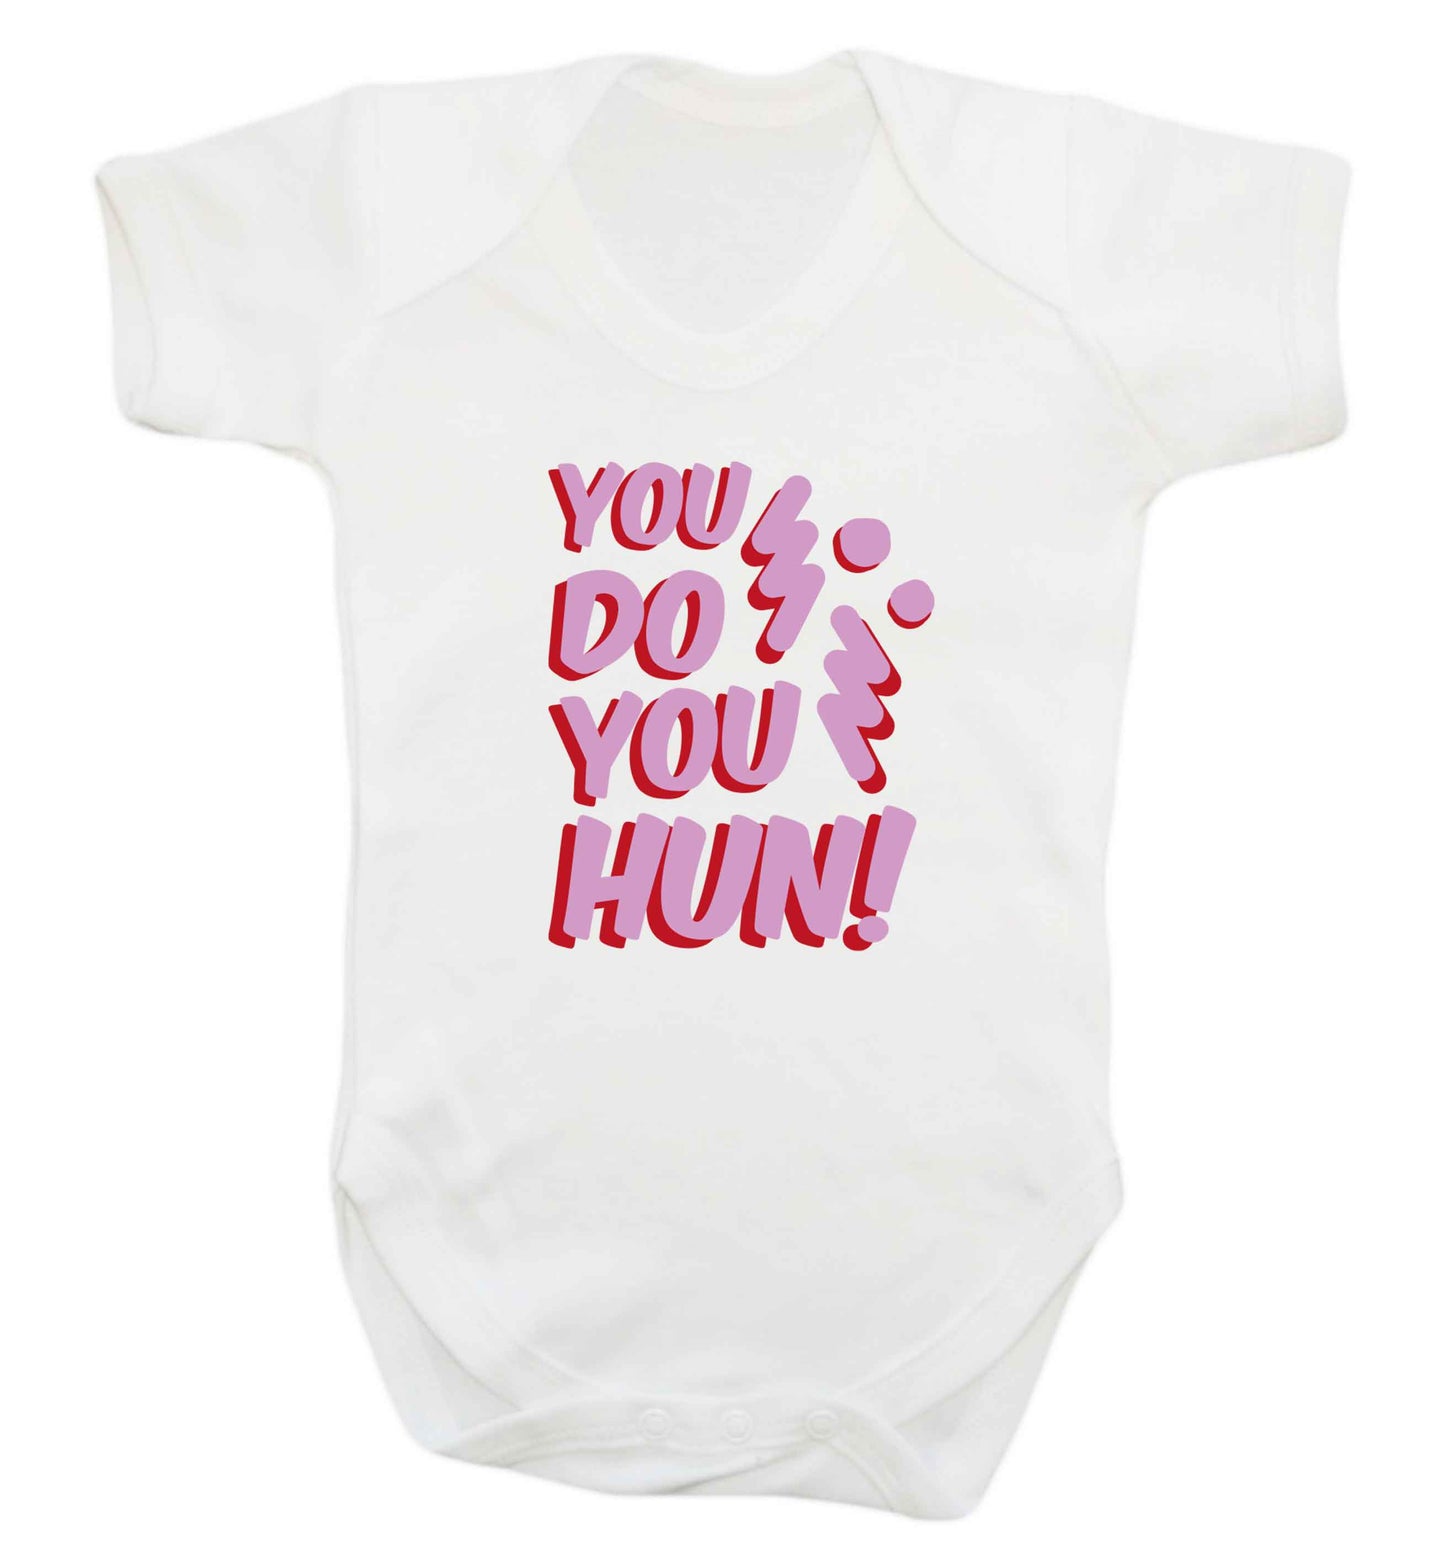 You do you hun baby vest white 18-24 months